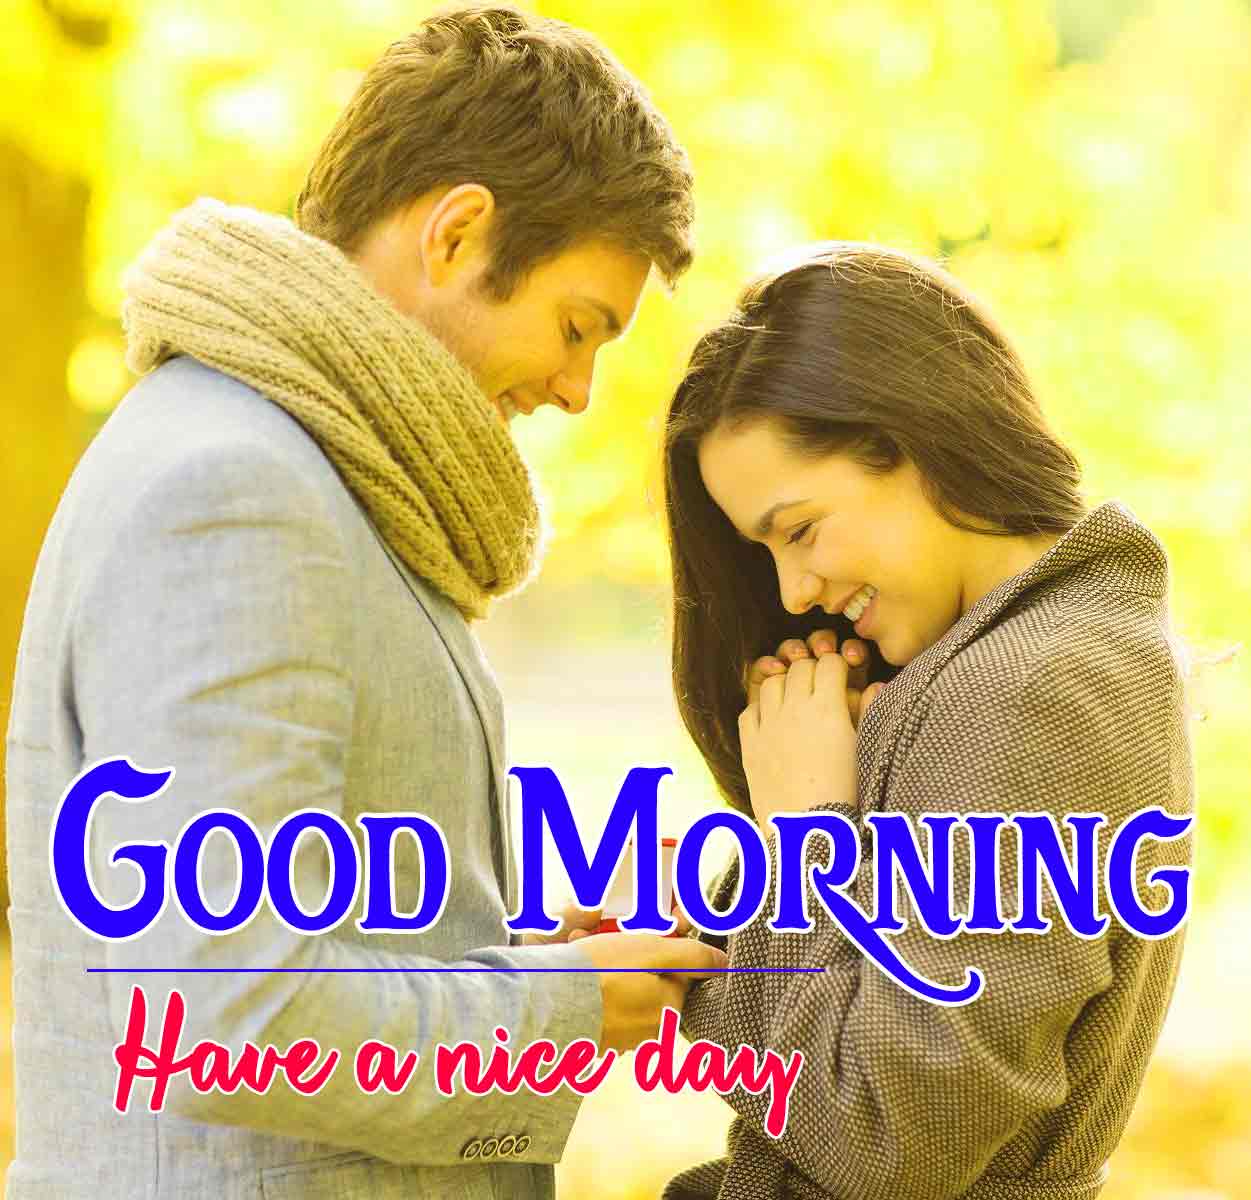 Good Morning 4k HD Images HD Pics Photo for Facebook